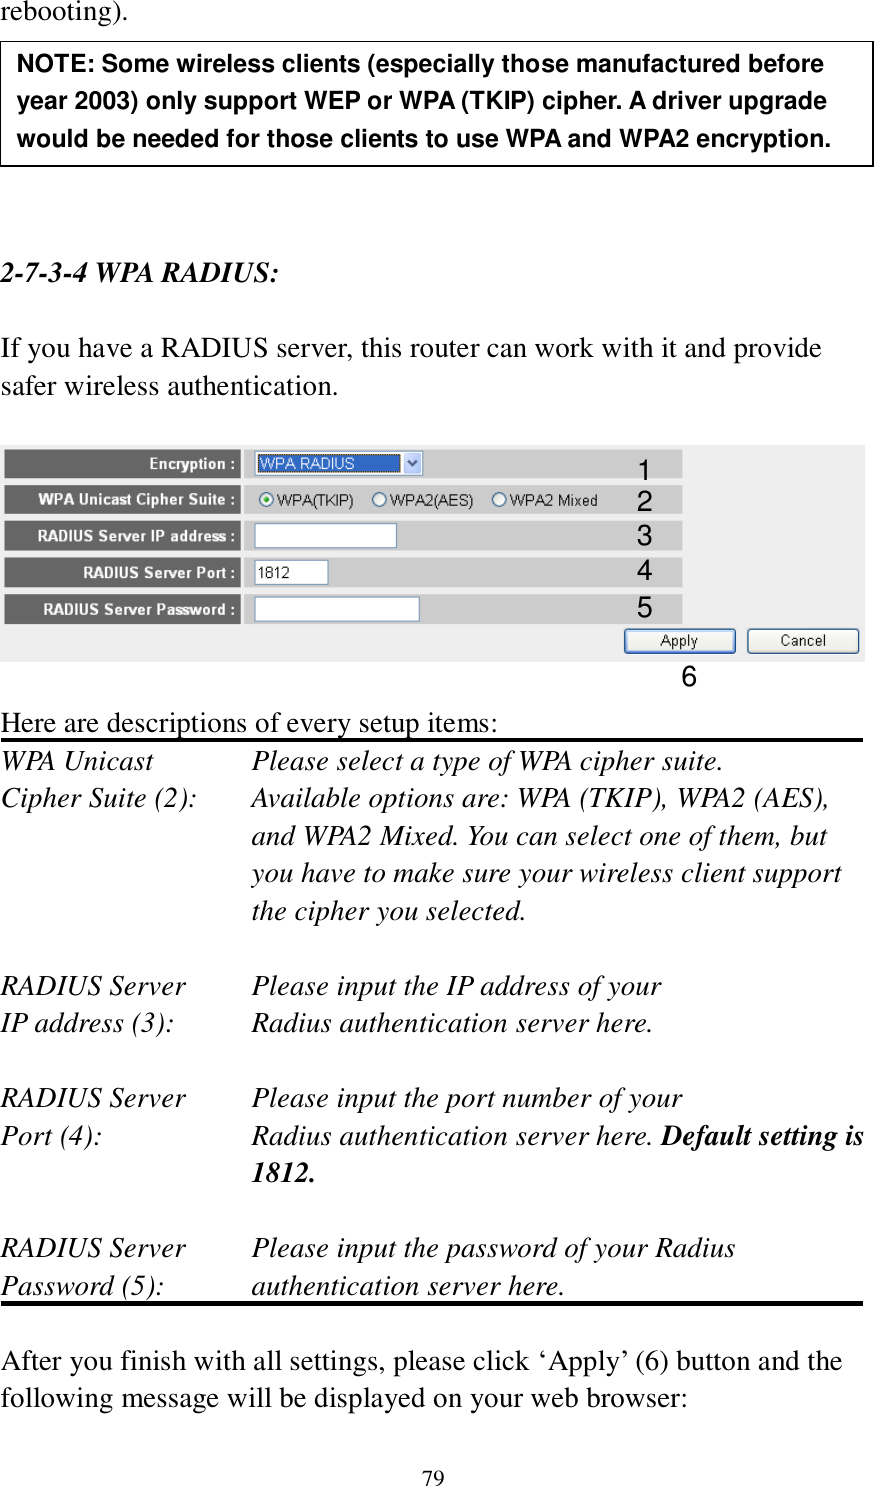 79 rebooting).       2-7-3-4 WPA RADIUS:  If you have a RADIUS server, this router can work with it and provide safer wireless authentication.    Here are descriptions of every setup items: WPA Unicast      Please select a type of WPA cipher suite. Cipher Suite (2):  Available options are: WPA (TKIP), WPA2 (AES), and WPA2 Mixed. You can select one of them, but you have to make sure your wireless client support the cipher you selected.  RADIUS Server     Please input the IP address of your IP address (3):      Radius authentication server here.  RADIUS Server     Please input the port number of your Port (4):    Radius authentication server here. Default setting is 1812.  RADIUS Server     Please input the password of your Radius Password (5):    authentication server here.  After you finish with all settings, please click „Apply‟ (6) button and the following message will be displayed on your web browser: NOTE: Some wireless clients (especially those manufactured before year 2003) only support WEP or WPA (TKIP) cipher. A driver upgrade would be needed for those clients to use WPA and WPA2 encryption. 1 3 4 2 5 6 